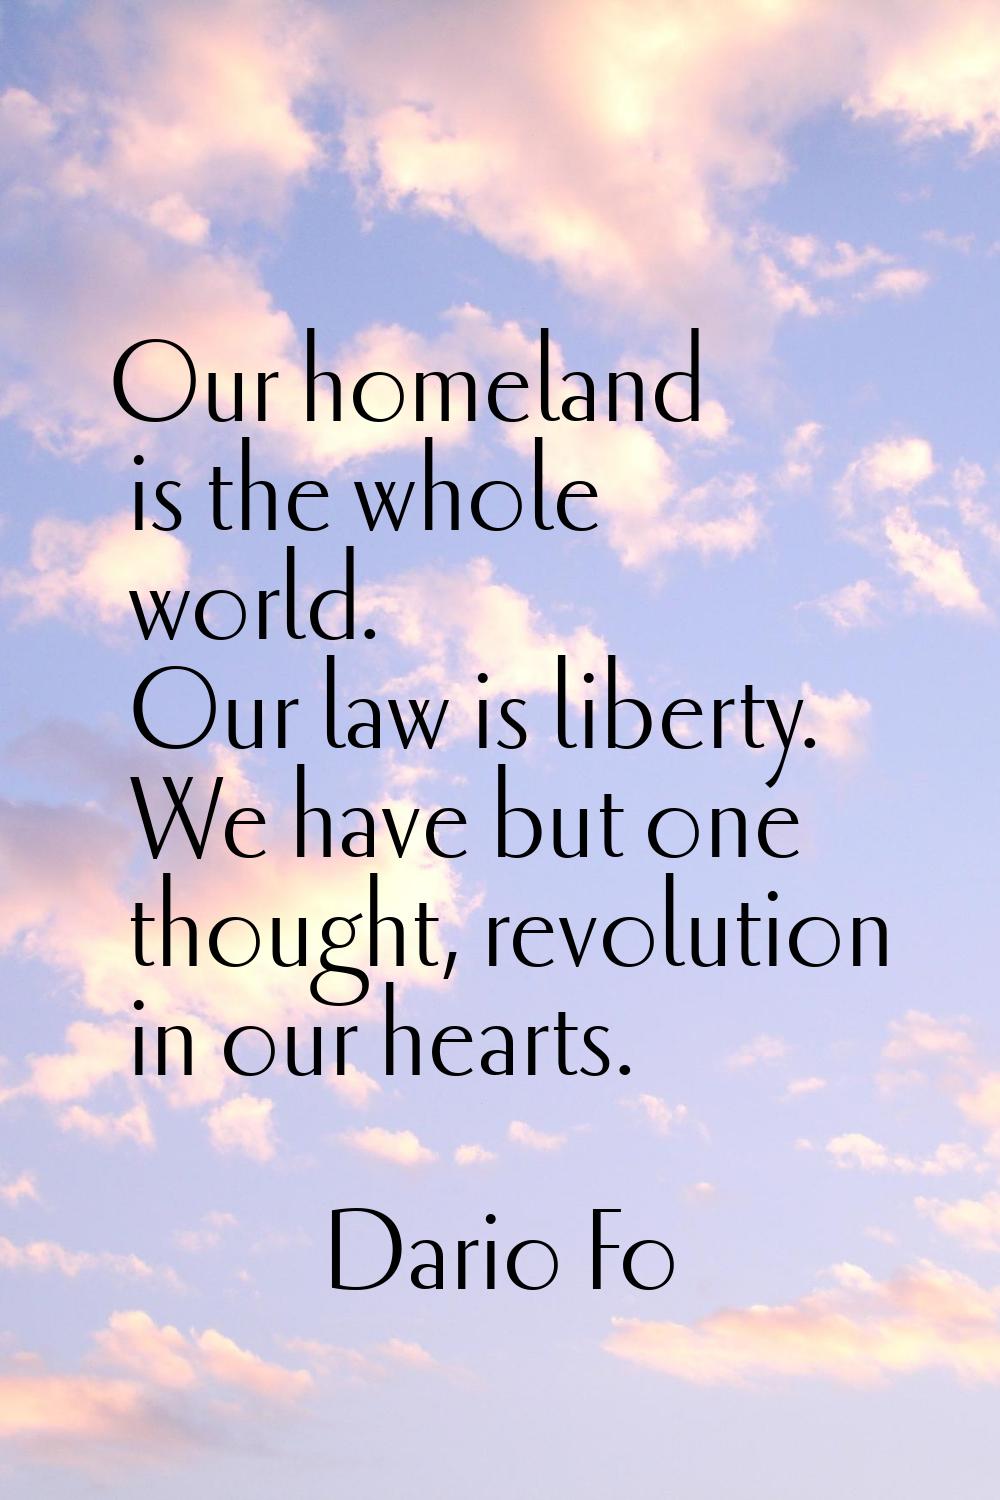 Our homeland is the whole world. Our law is liberty. We have but one thought, revolution in our hea